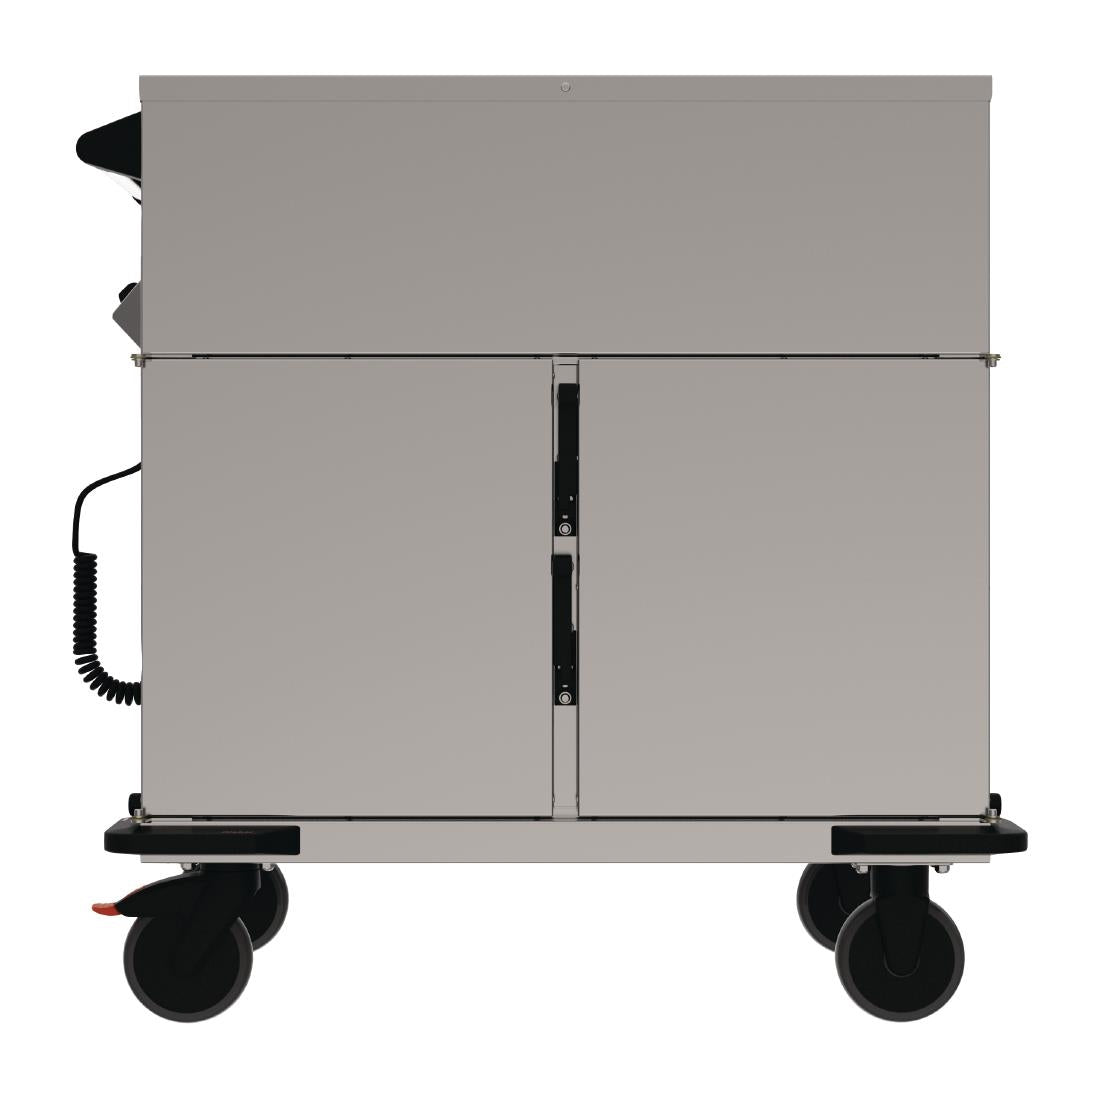 FS476 Reiber Heated Food Service Trolley Norm 11-2 JD Catering Equipment Solutions Ltd